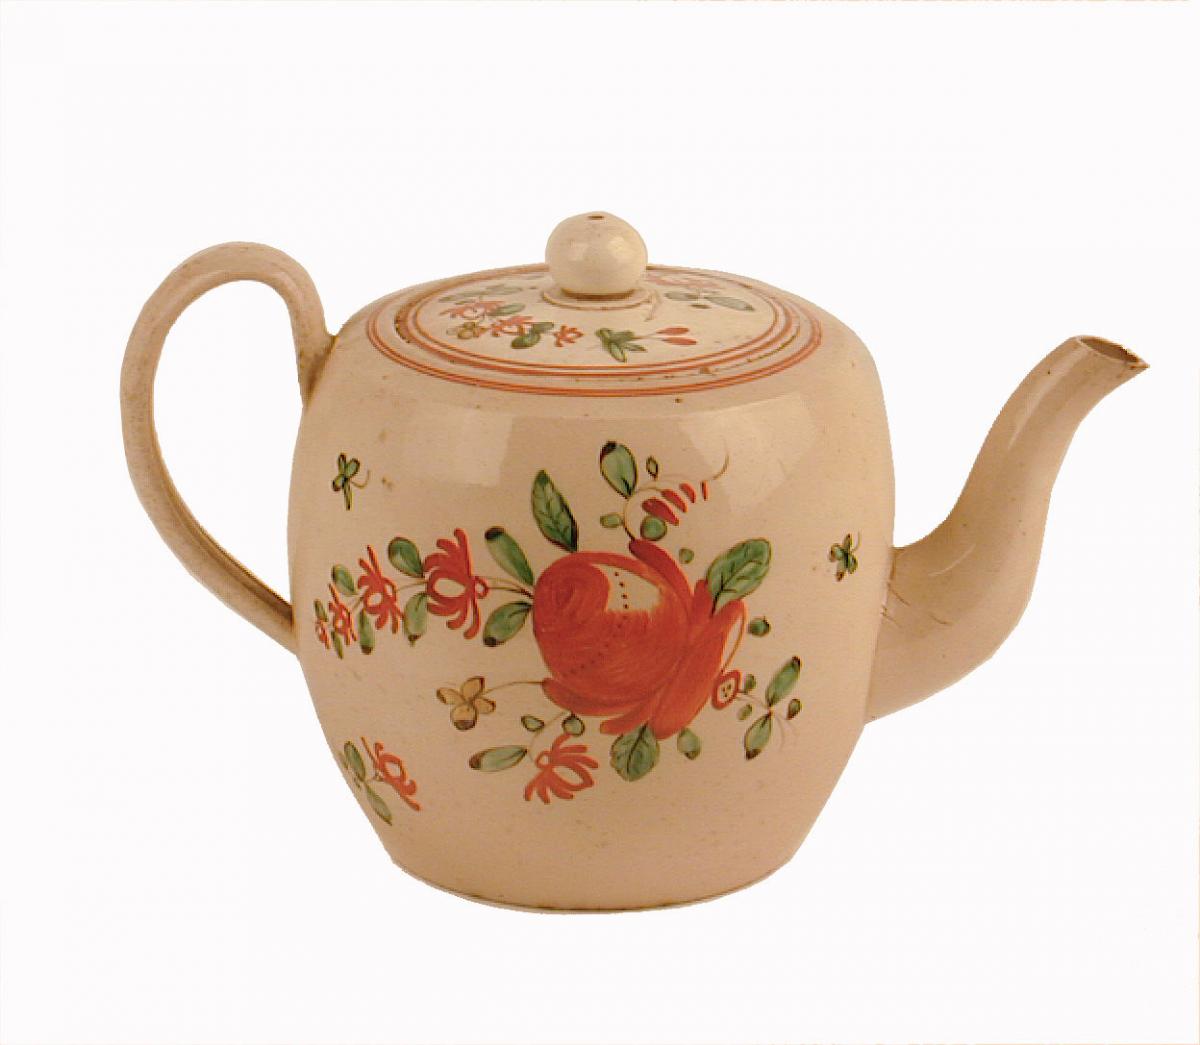 Creamware teapot and cover